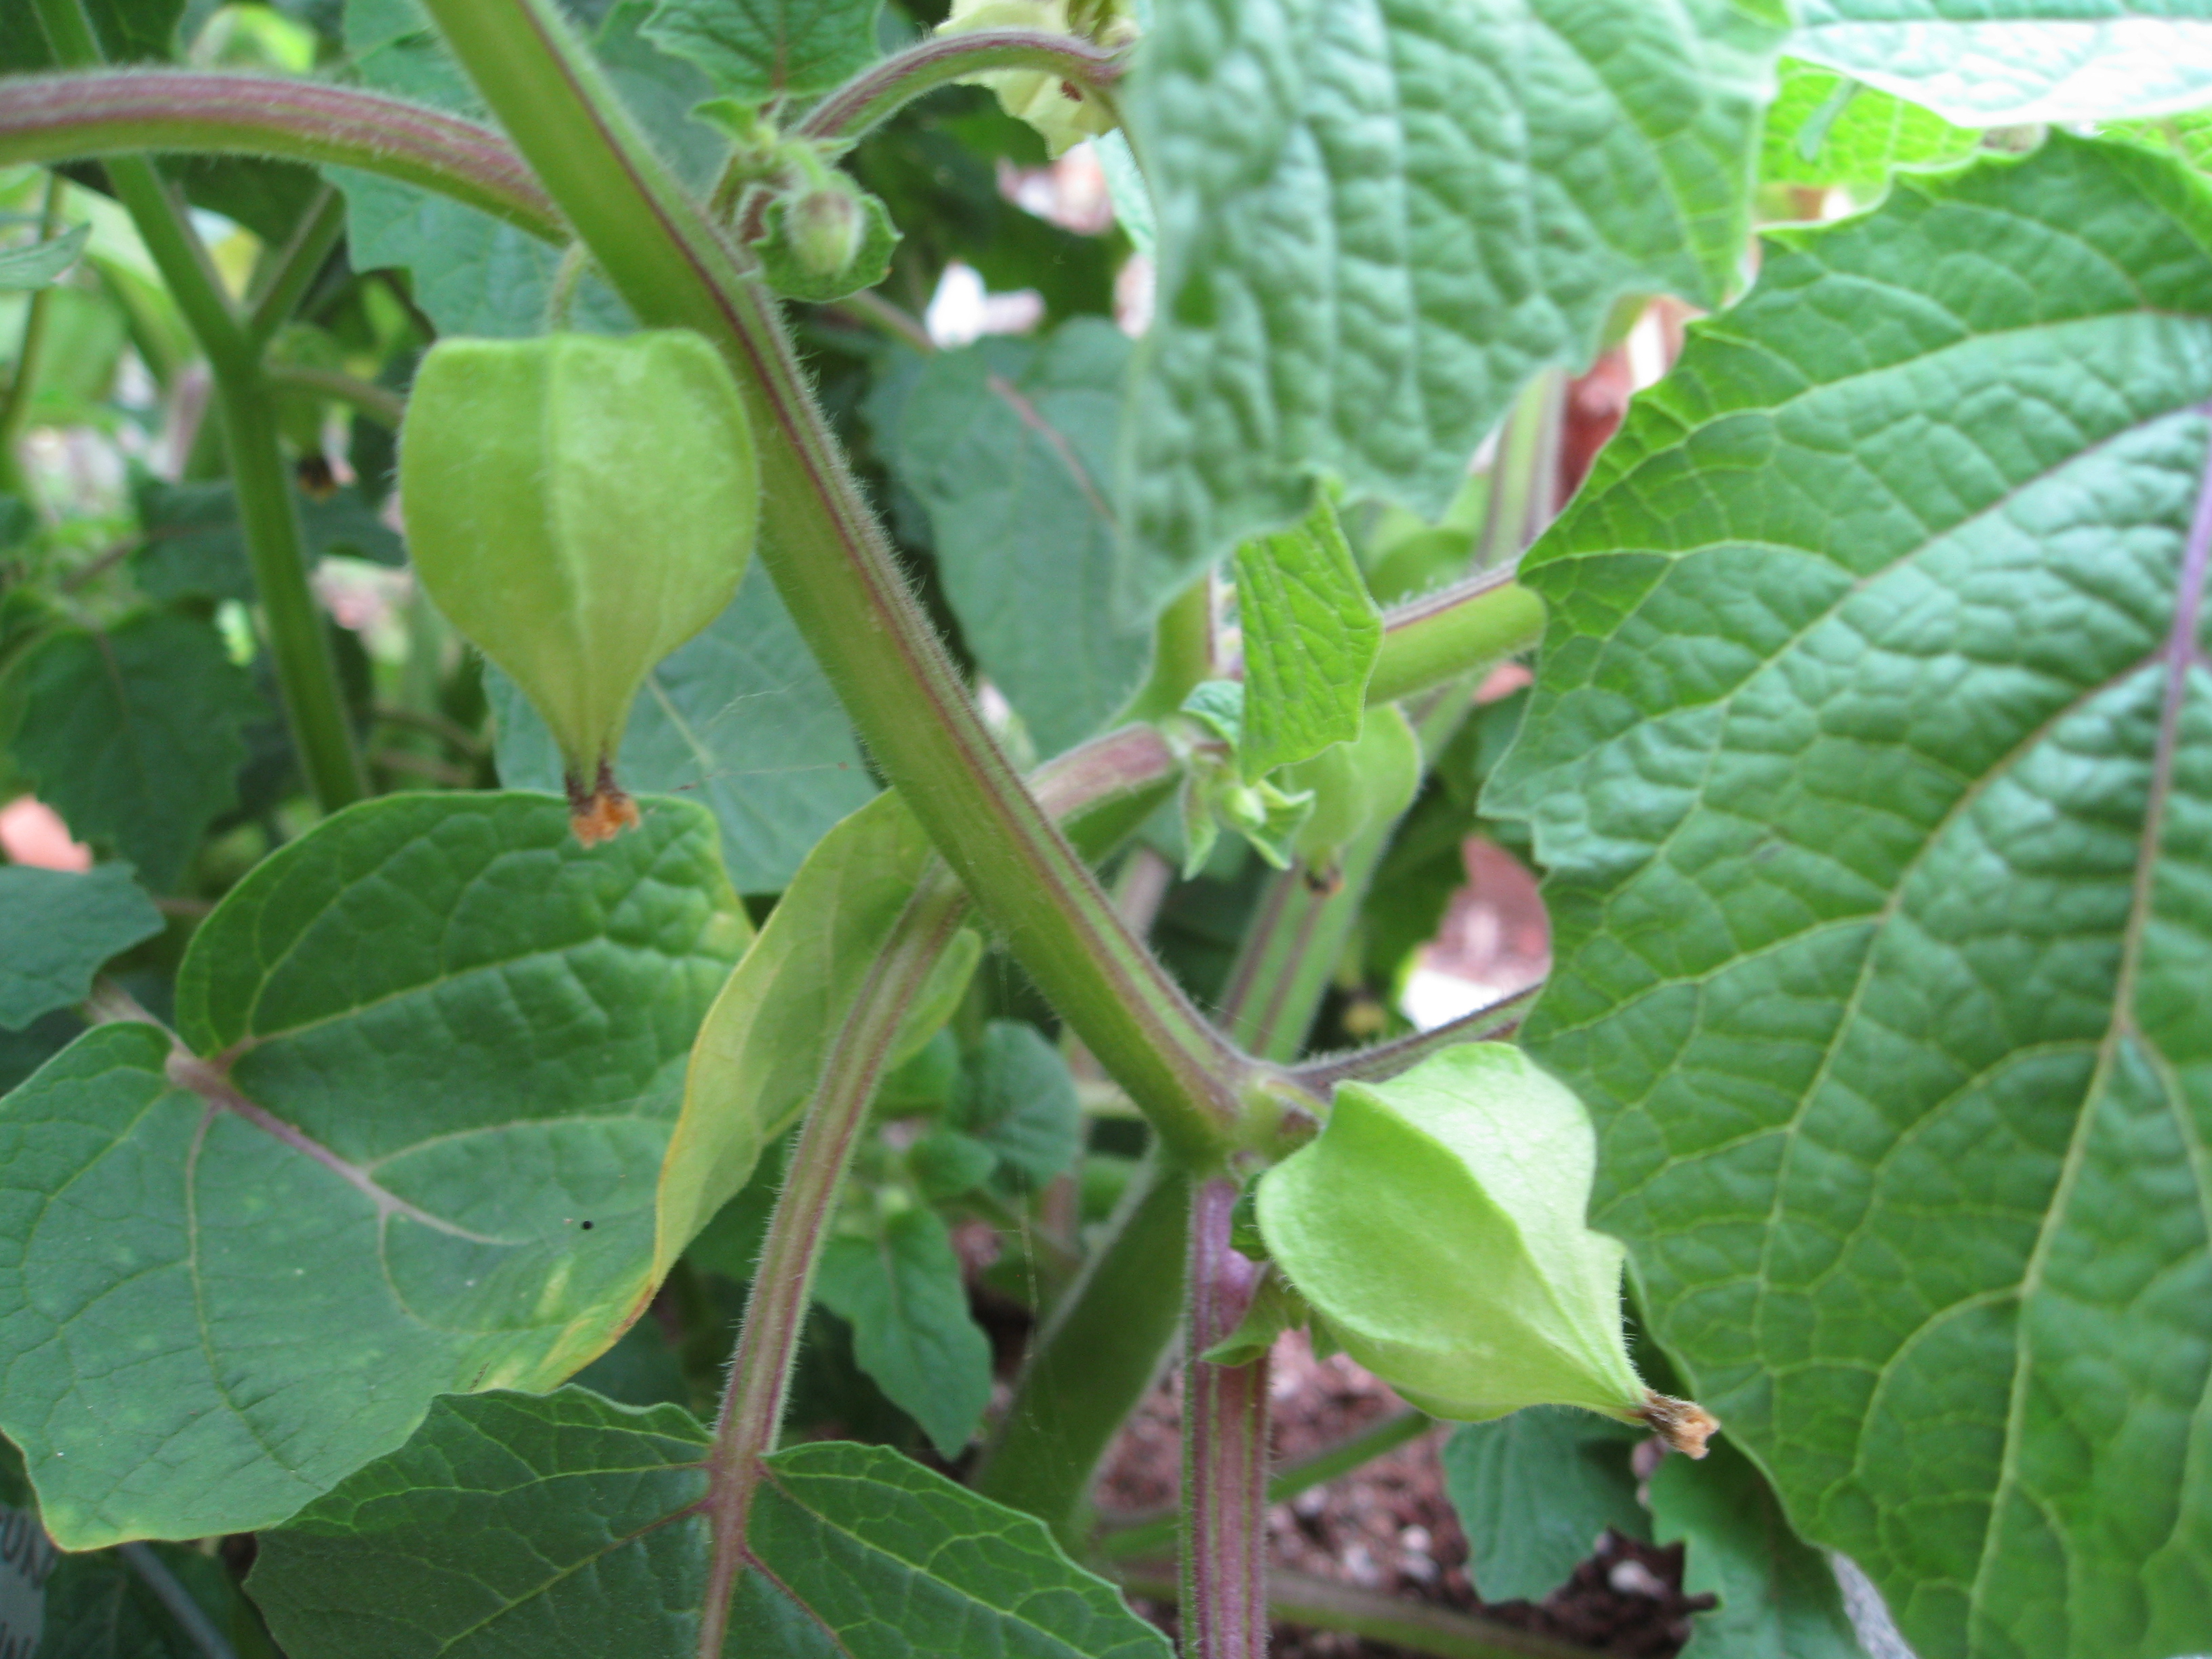 Lanterns appear and fruit develops inside. Pods turn brown/cream as they mature.